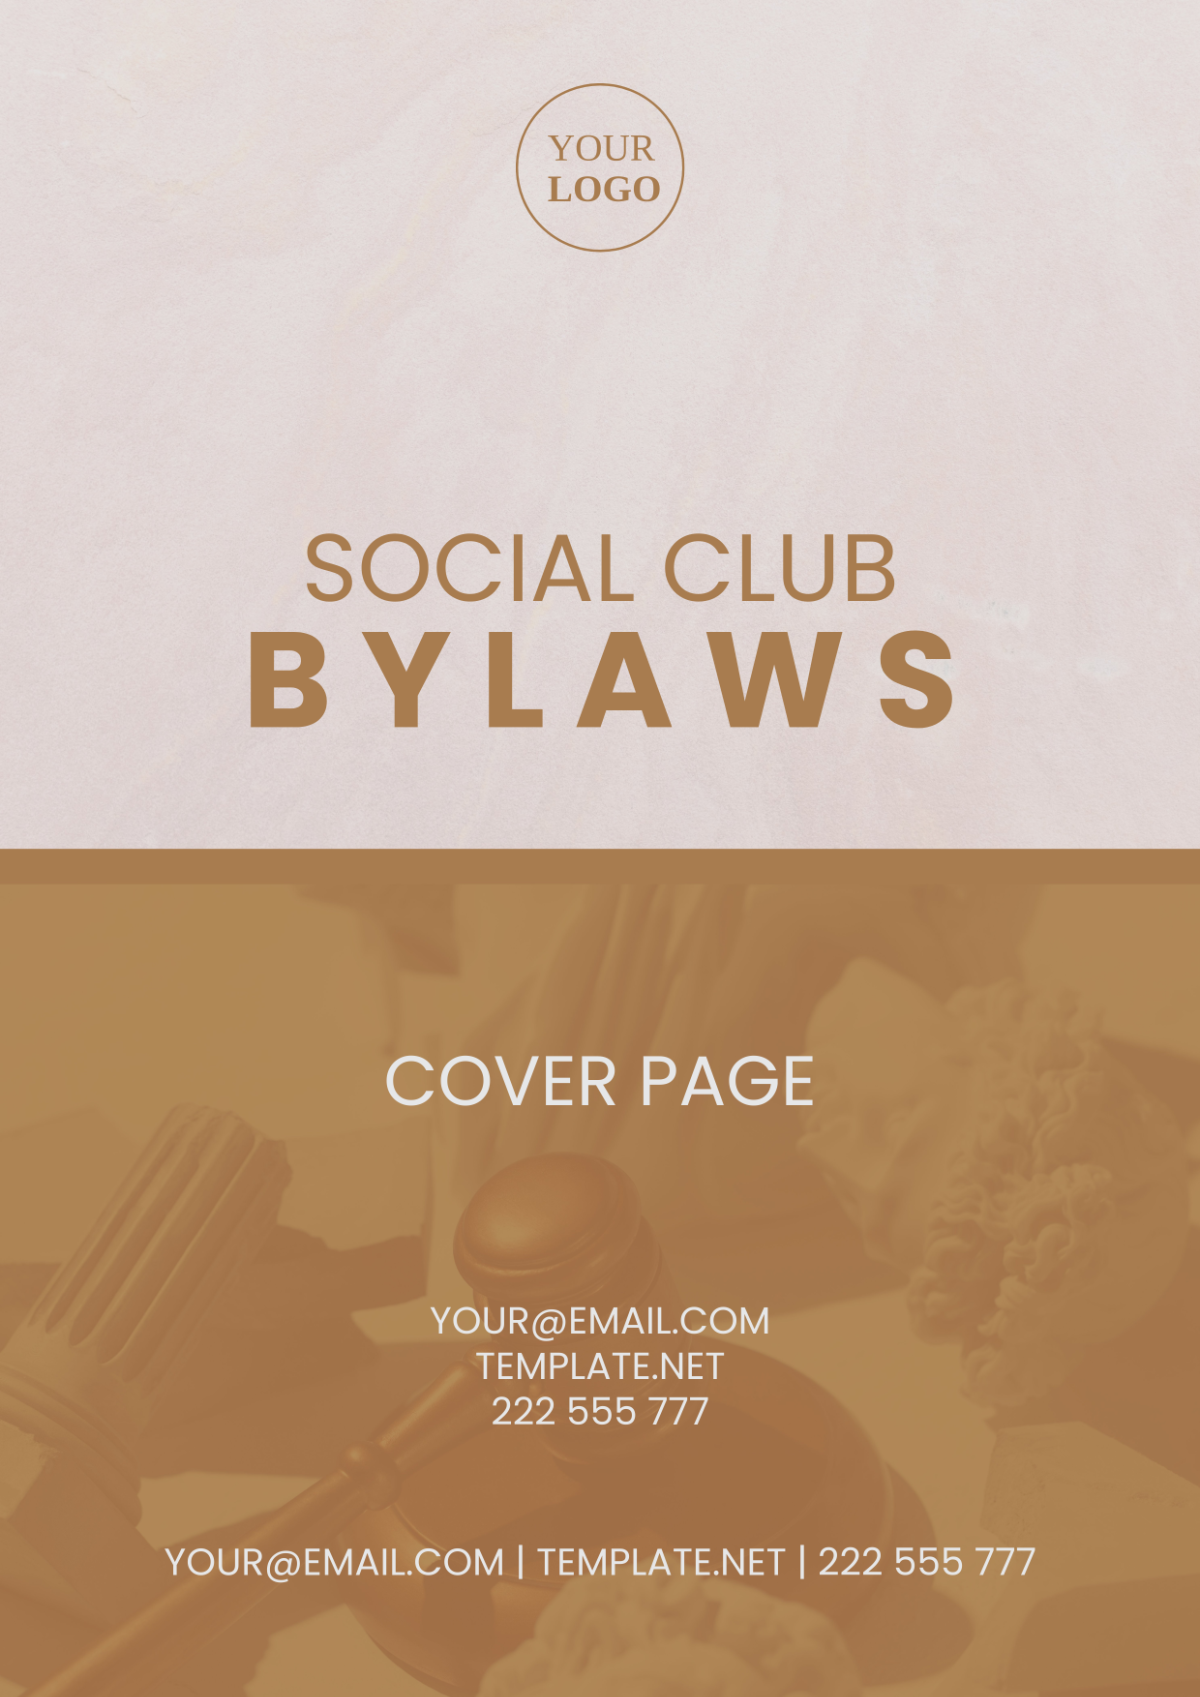 Social Club Bylaws Cover Page Template